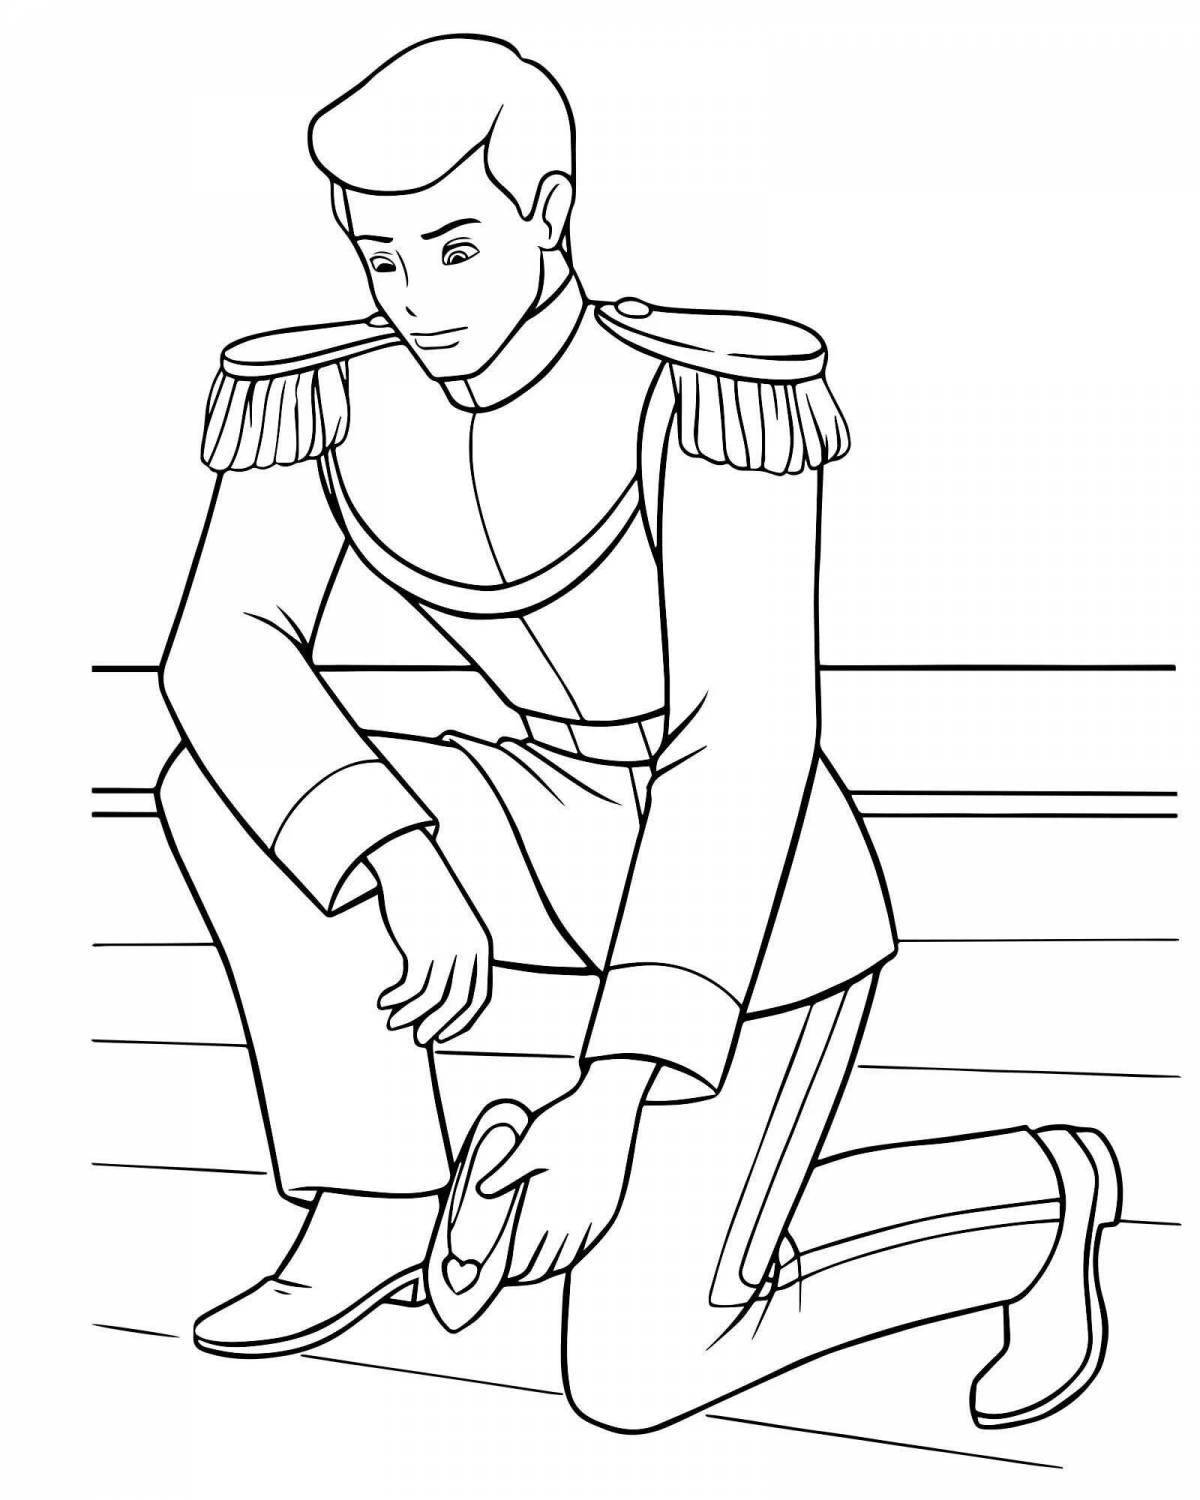 Brilliant prince coloring pages for kids